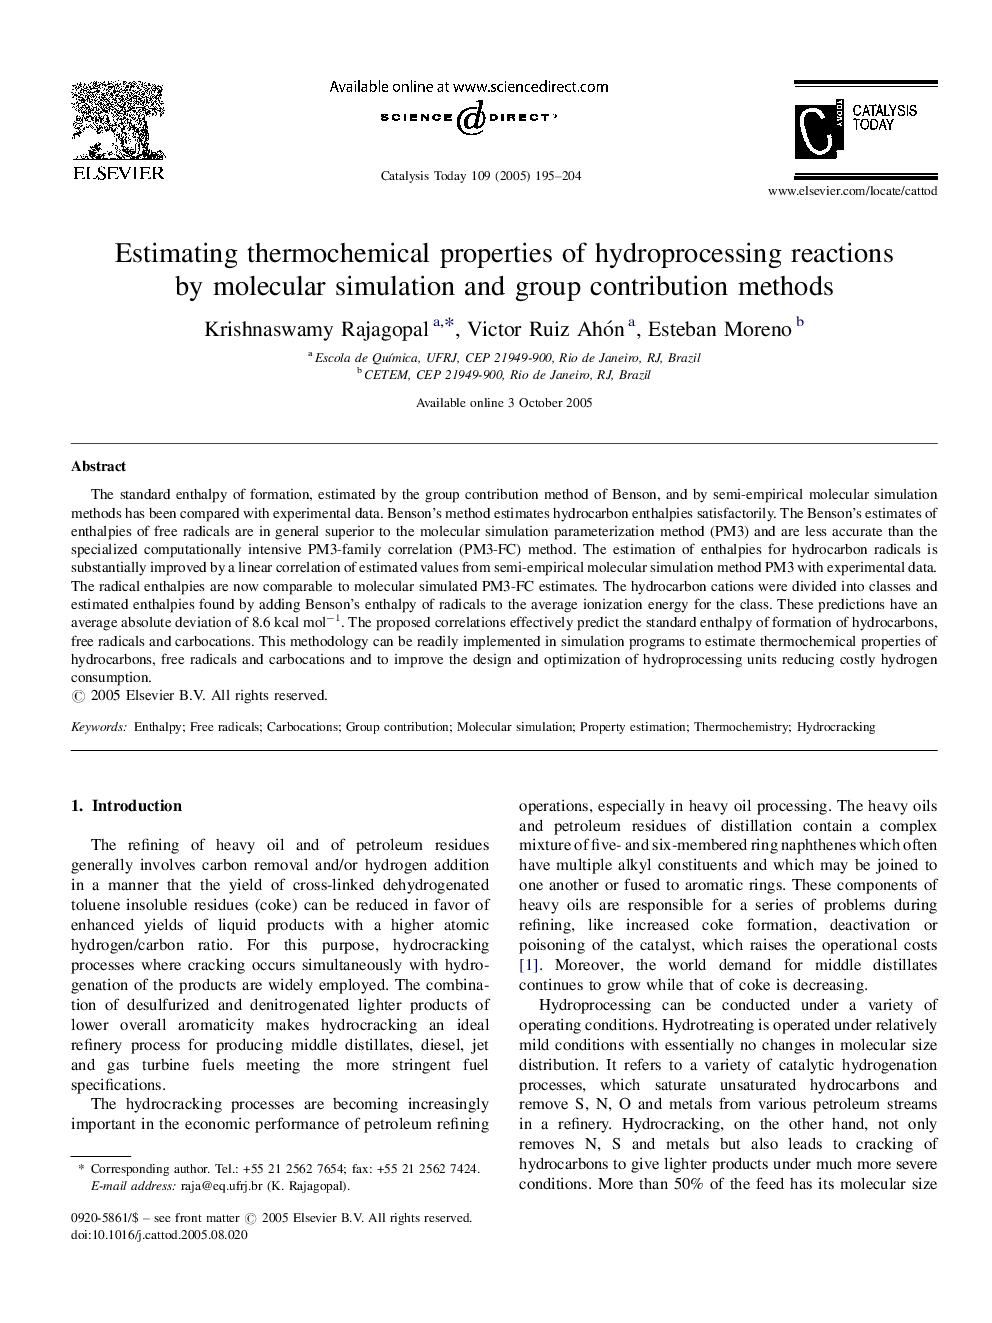 Estimating thermochemical properties of hydroprocessing reactions by molecular simulation and group contribution methods